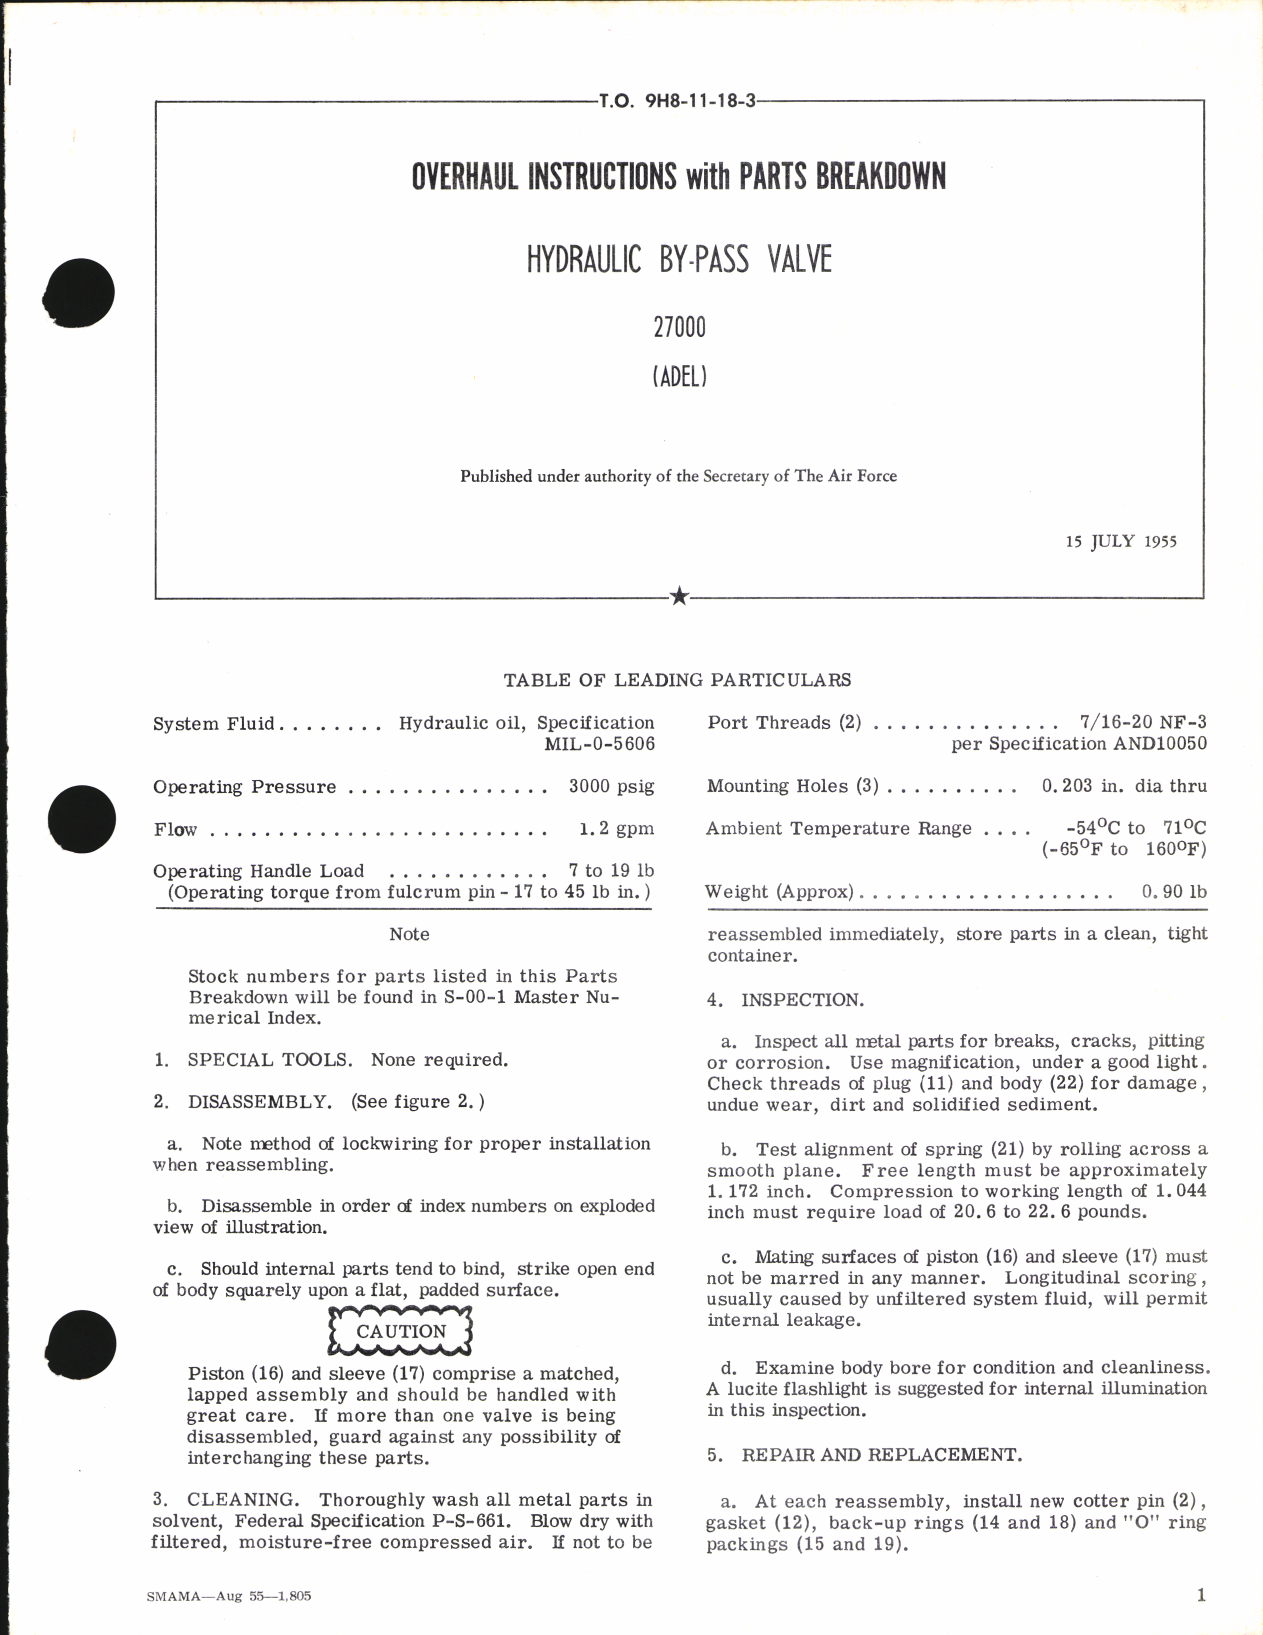 Sample page 1 from AirCorps Library document: Overhaul Instructions with Parts Breakdown for Hydraulic By-Pass Valve 27000